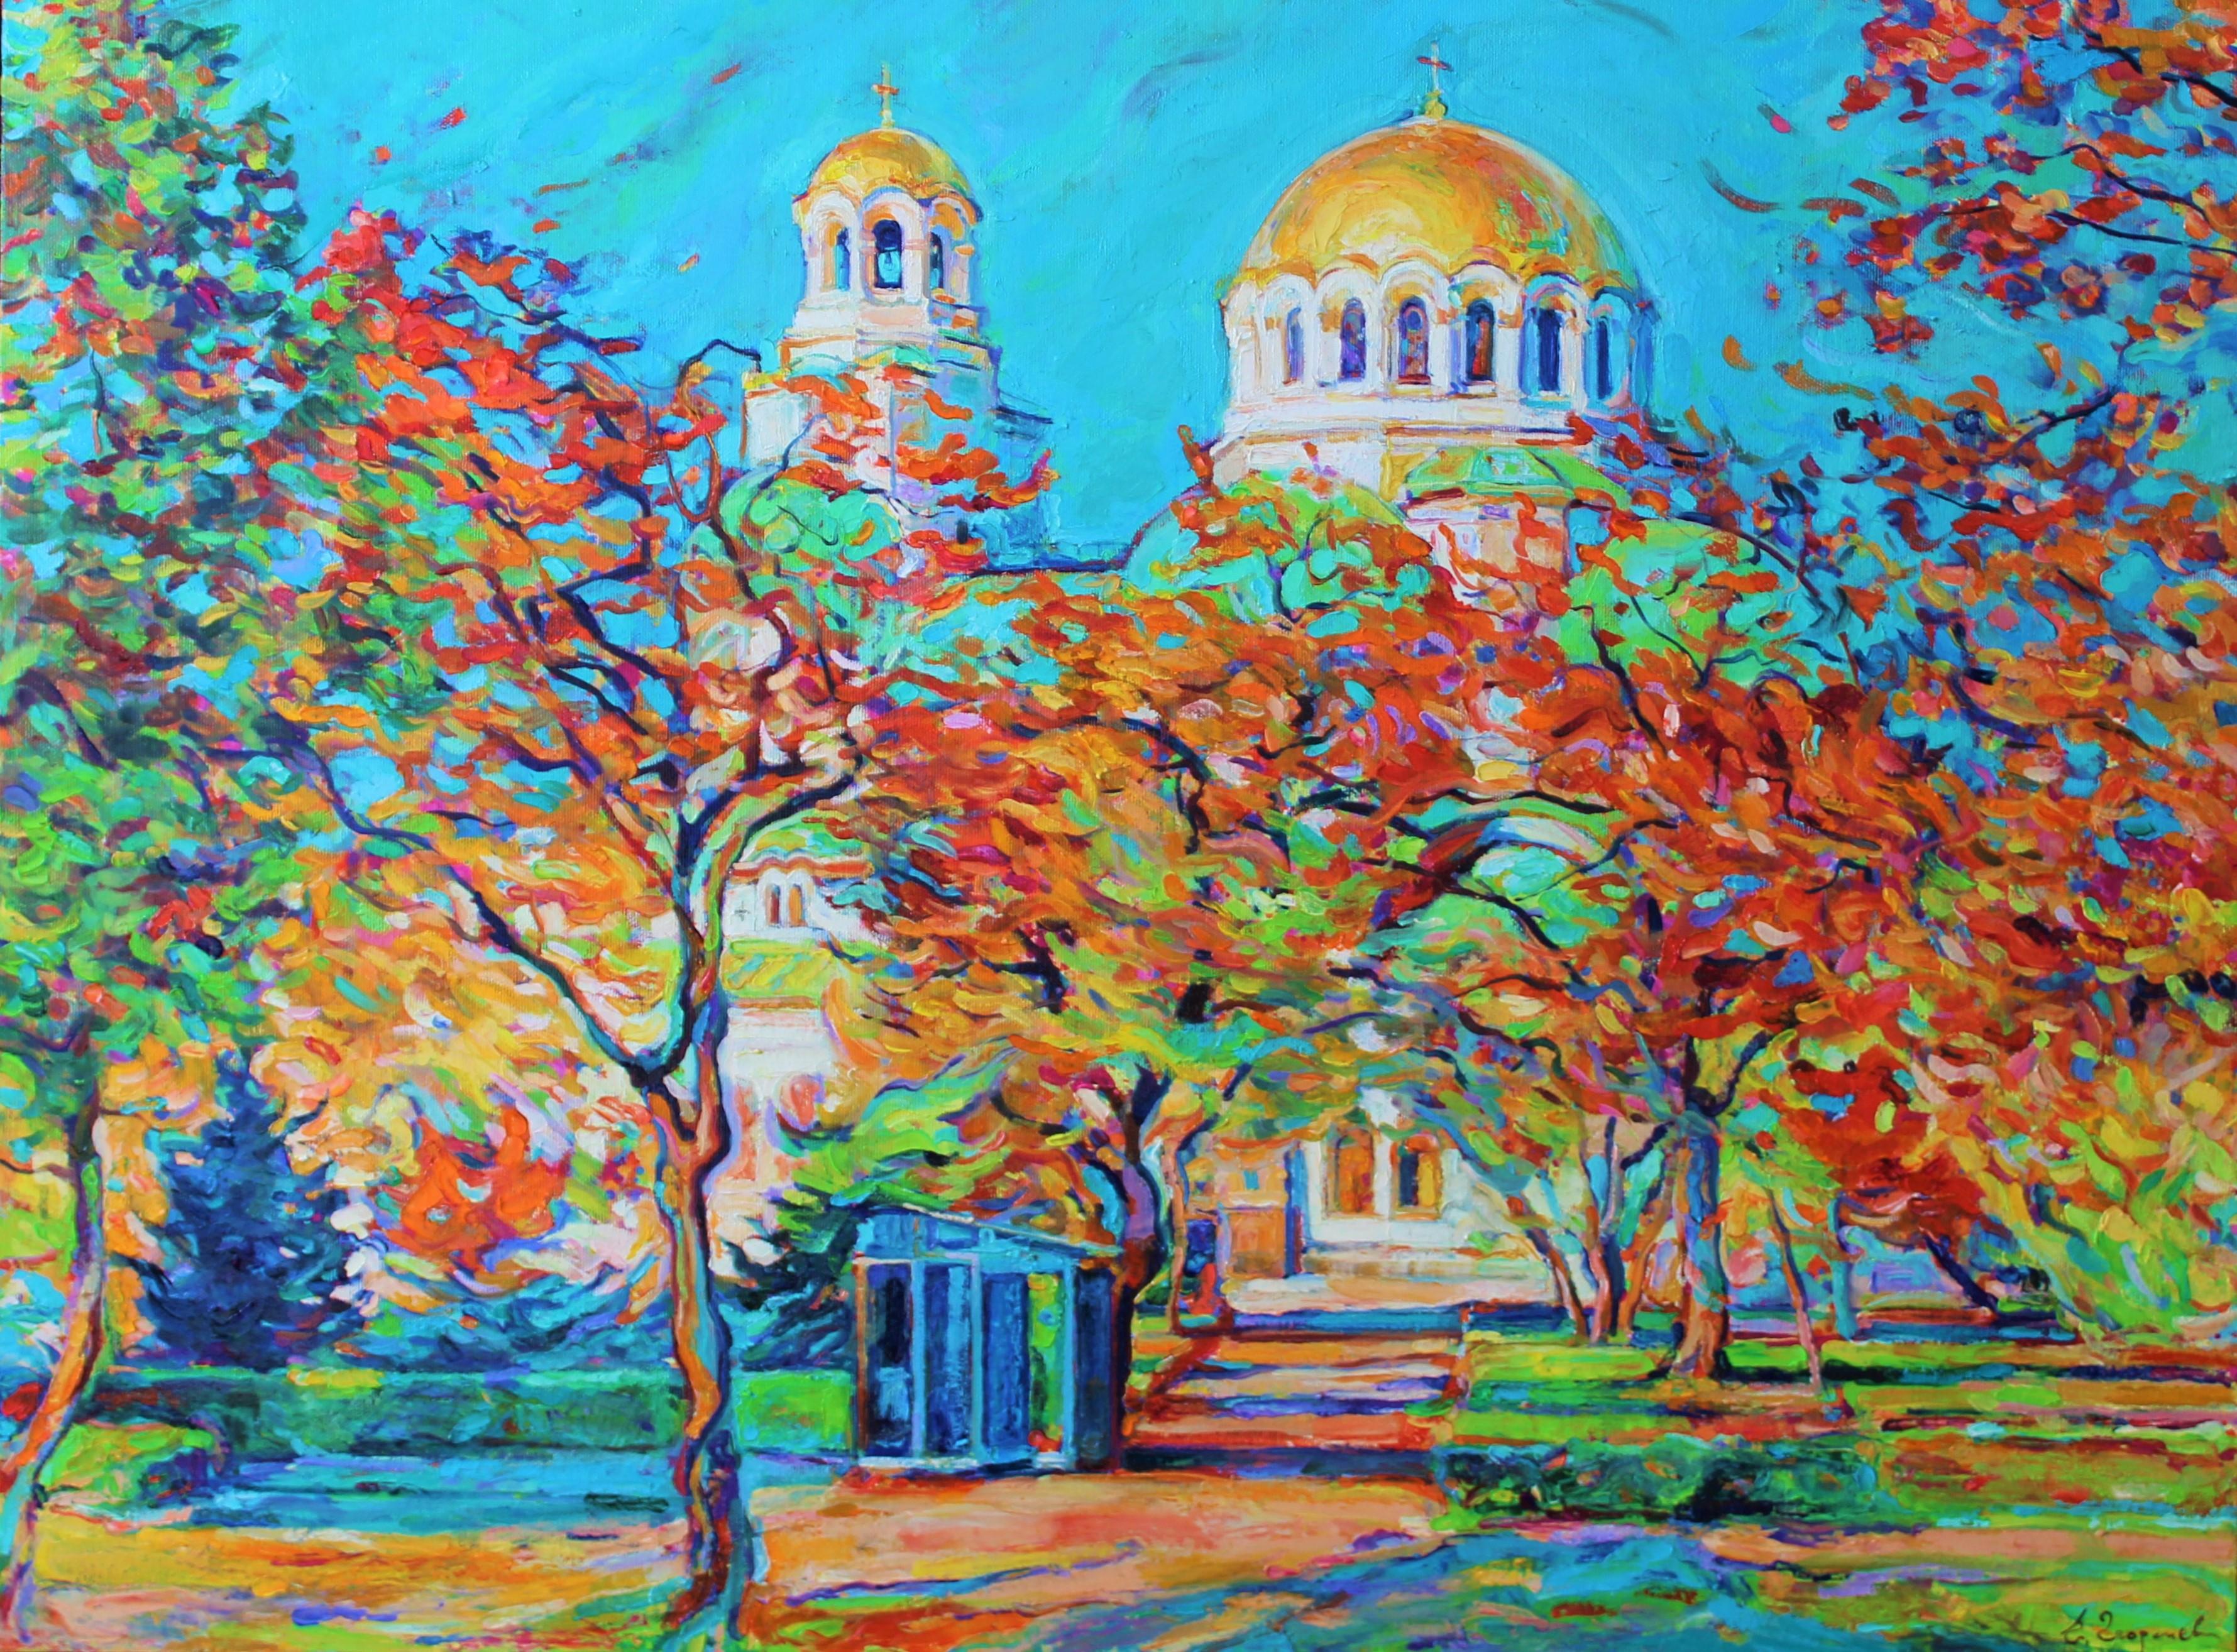 Red Garden with Golden Domes - Landscape Painting Red Blue Yellow White Green 